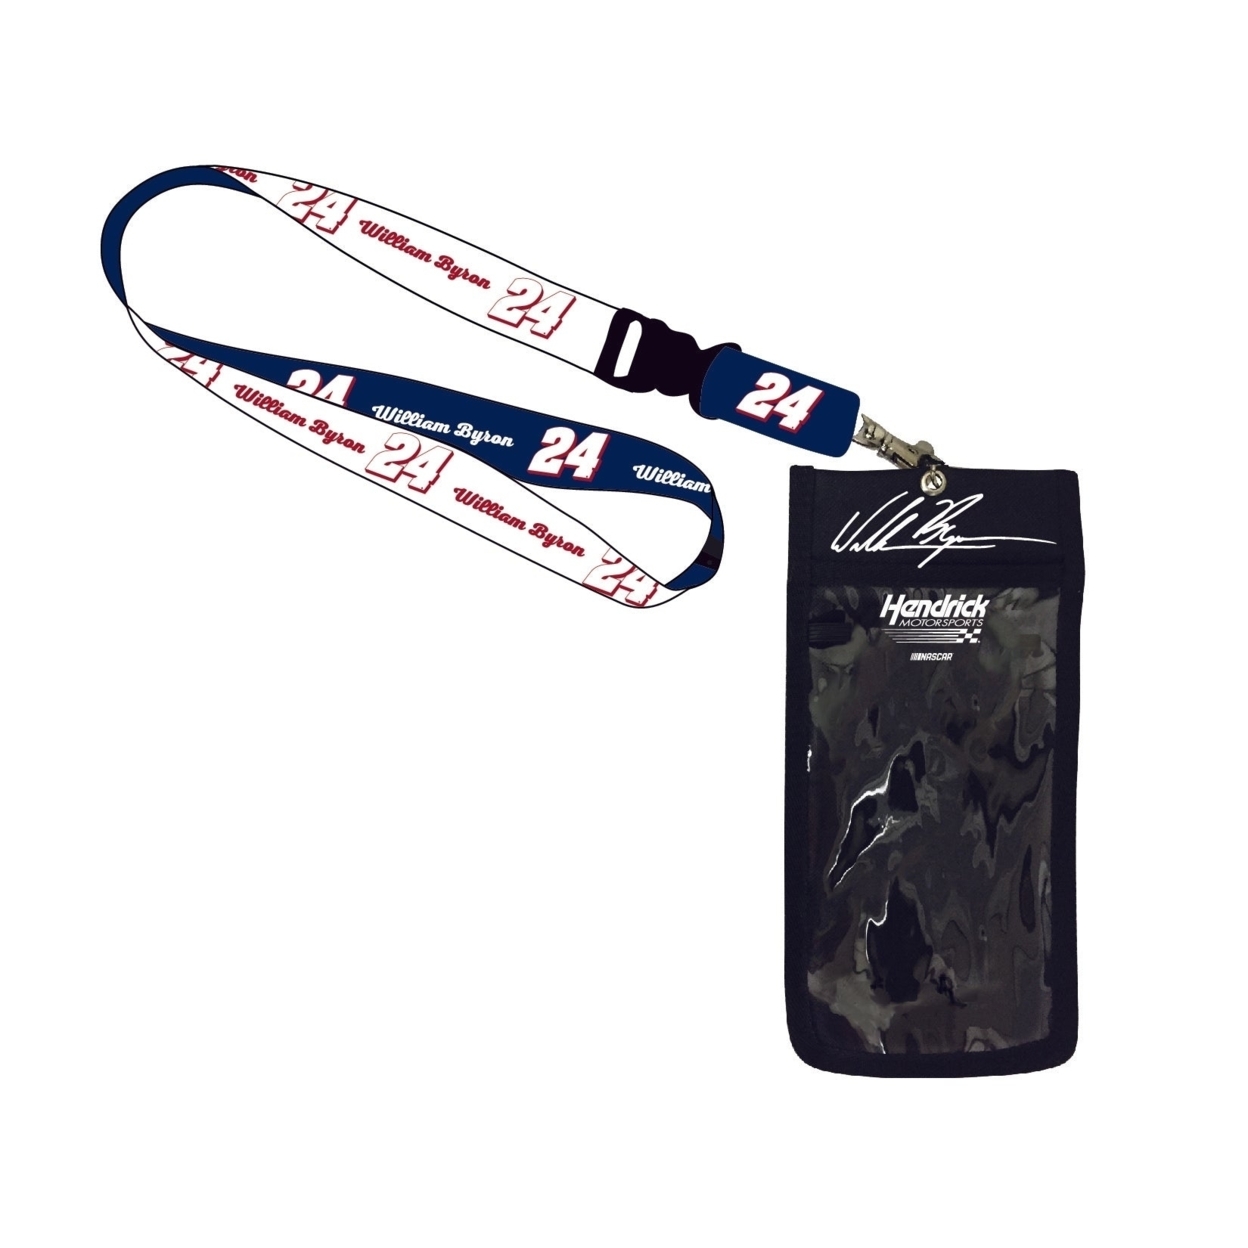 William Byron #24 Racing Nascar Deluxe Credential Holder W/Lanyard New For 2020